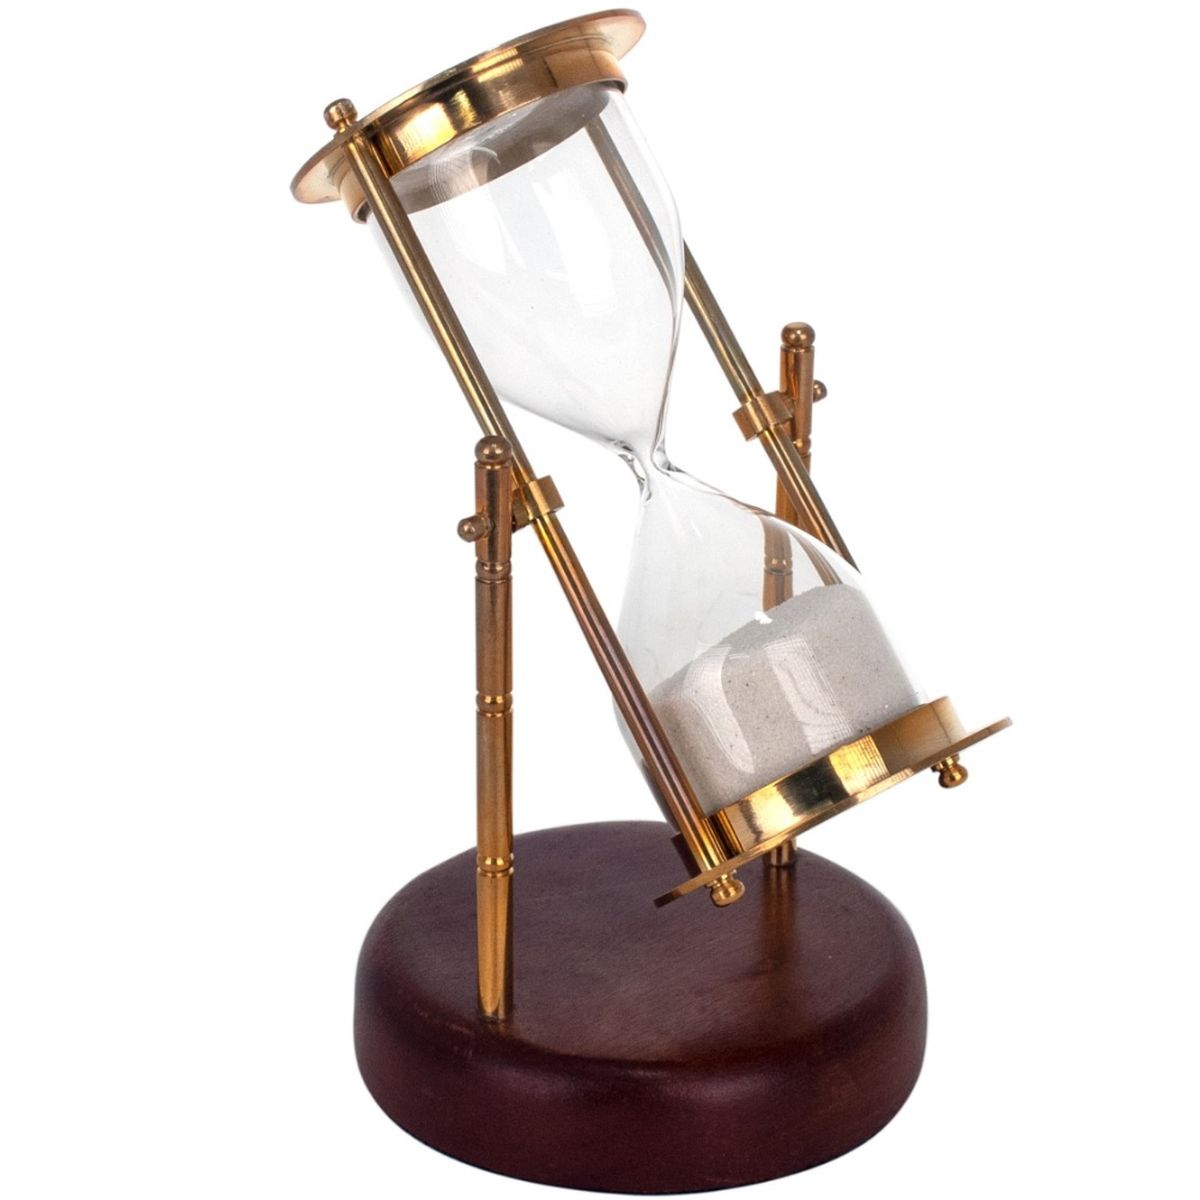 Golden brass and glass decorative hourglass